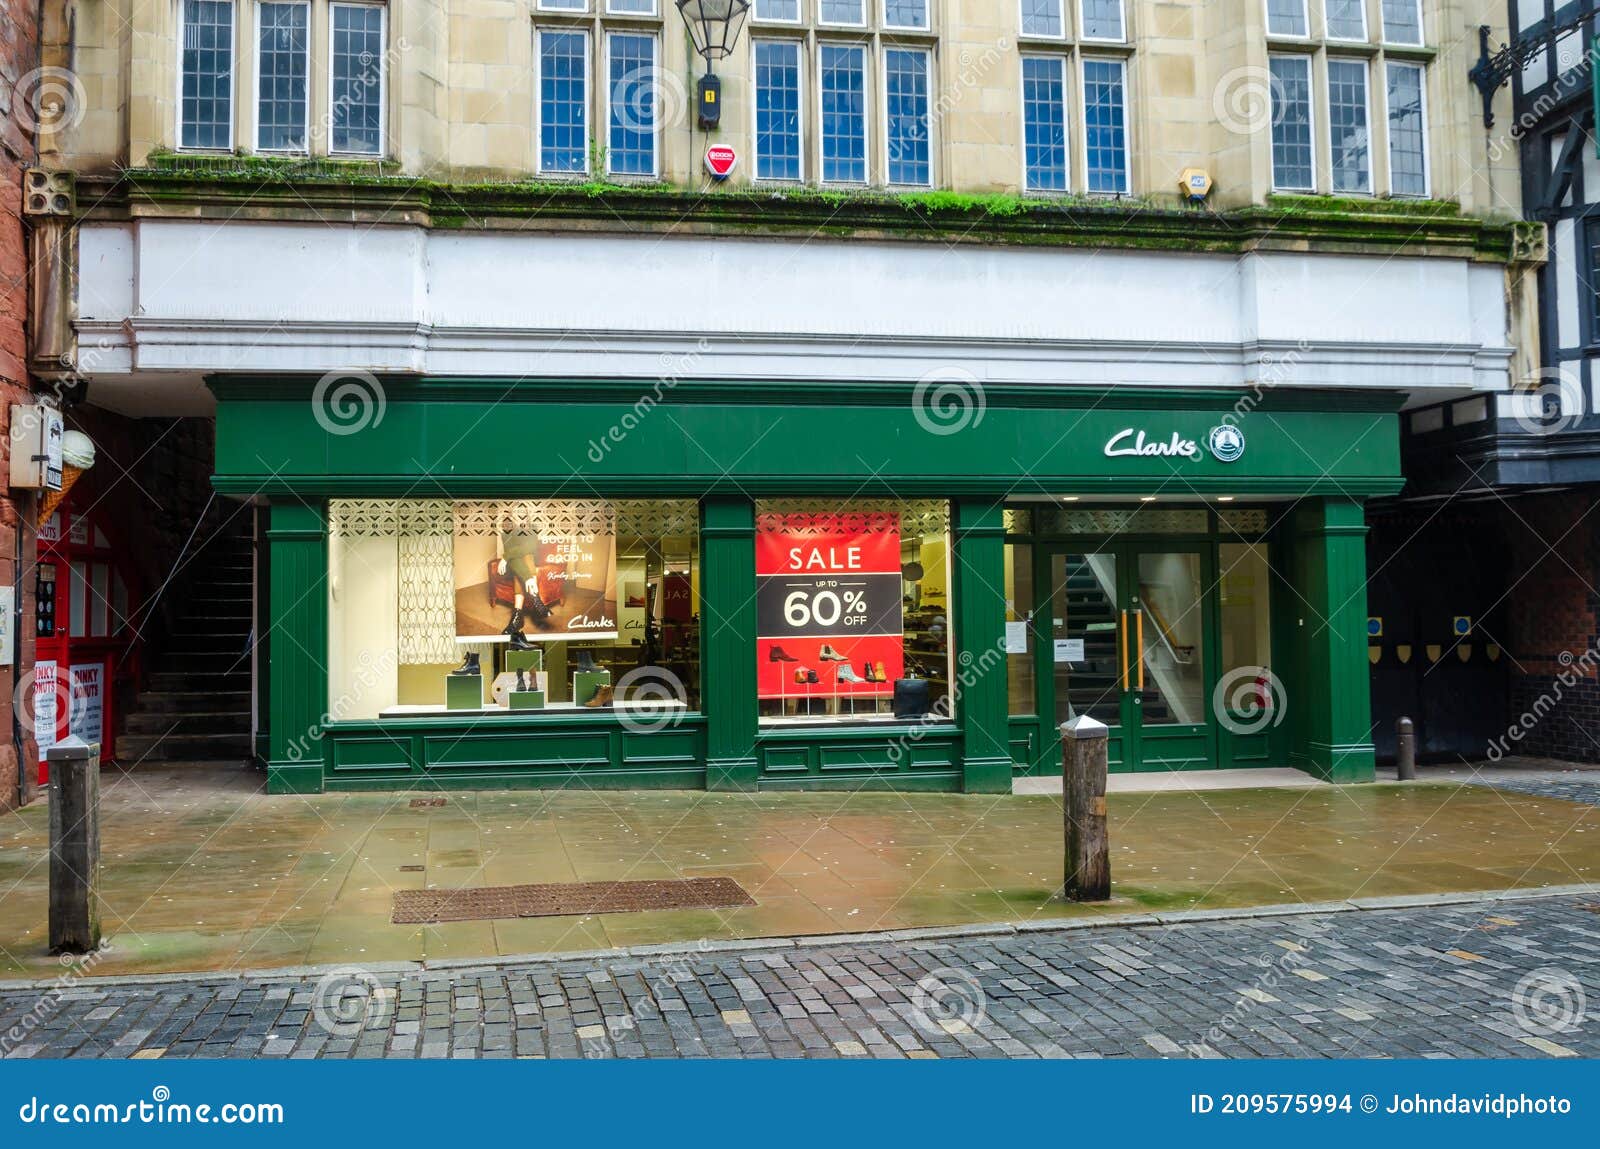 clarks guildford opening times